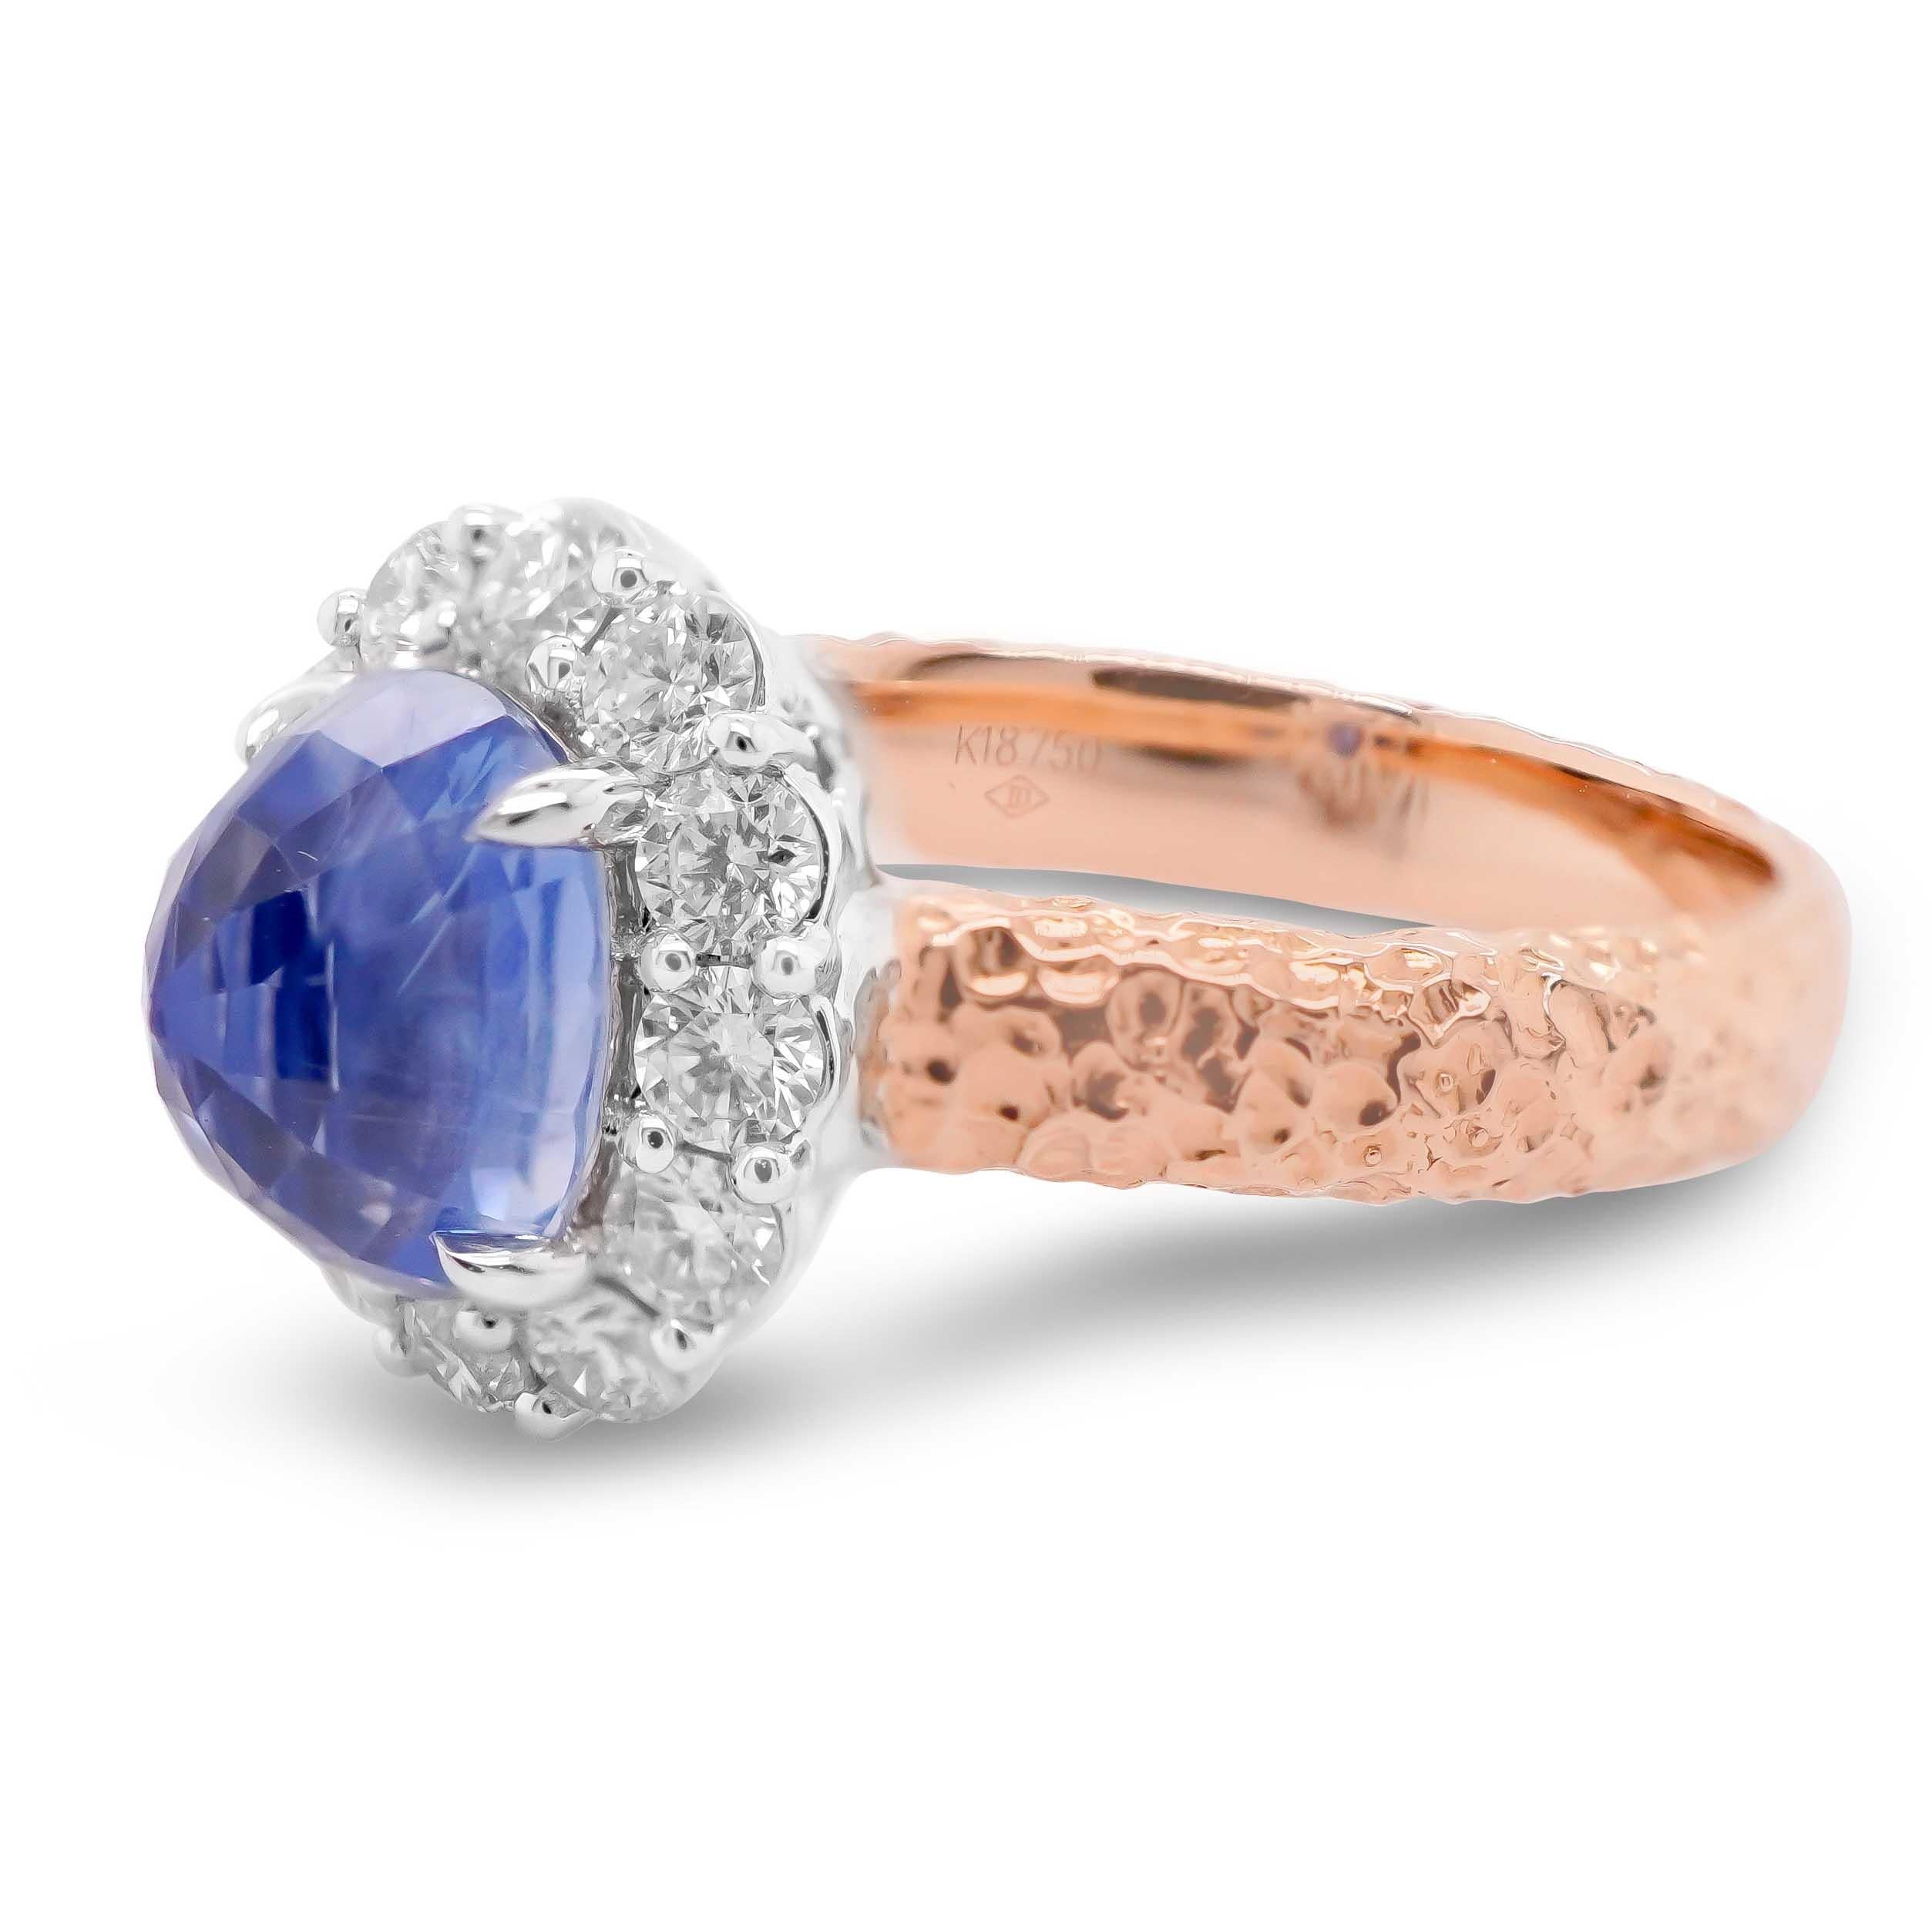 A certified 2.68 carat sapphire is set upside down in a quirky take on inversion in this matt finished rose gold 18K hand made ring.
The ring is also accented by 0.58 carat of white round brilliant diamond. The details of the ring are mentioned